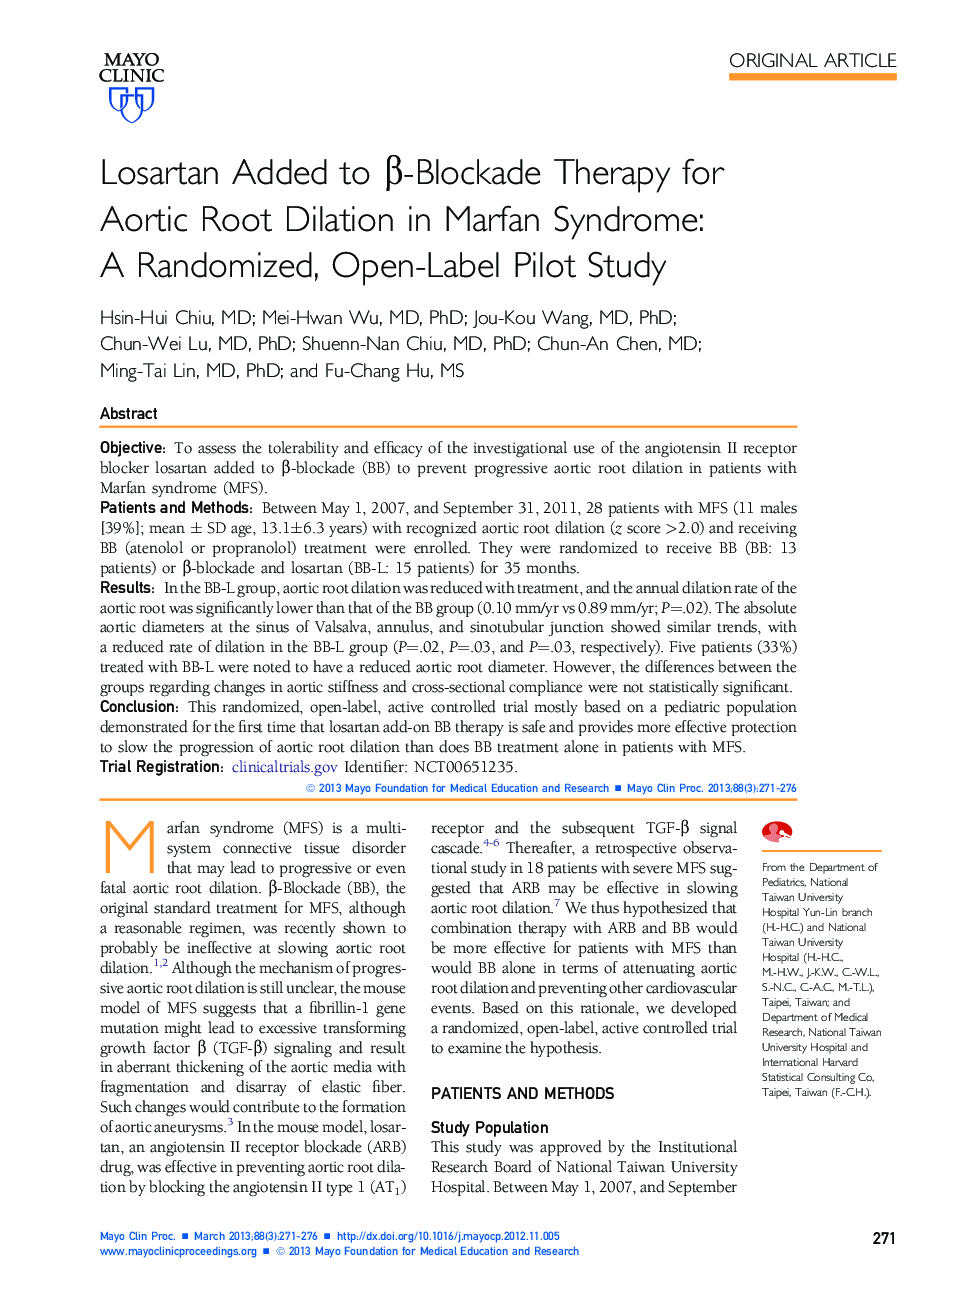 Losartan Added to Î²-Blockade Therapy for Aortic Root Dilation in Marfan Syndrome: A Randomized, Open-Label Pilot Study